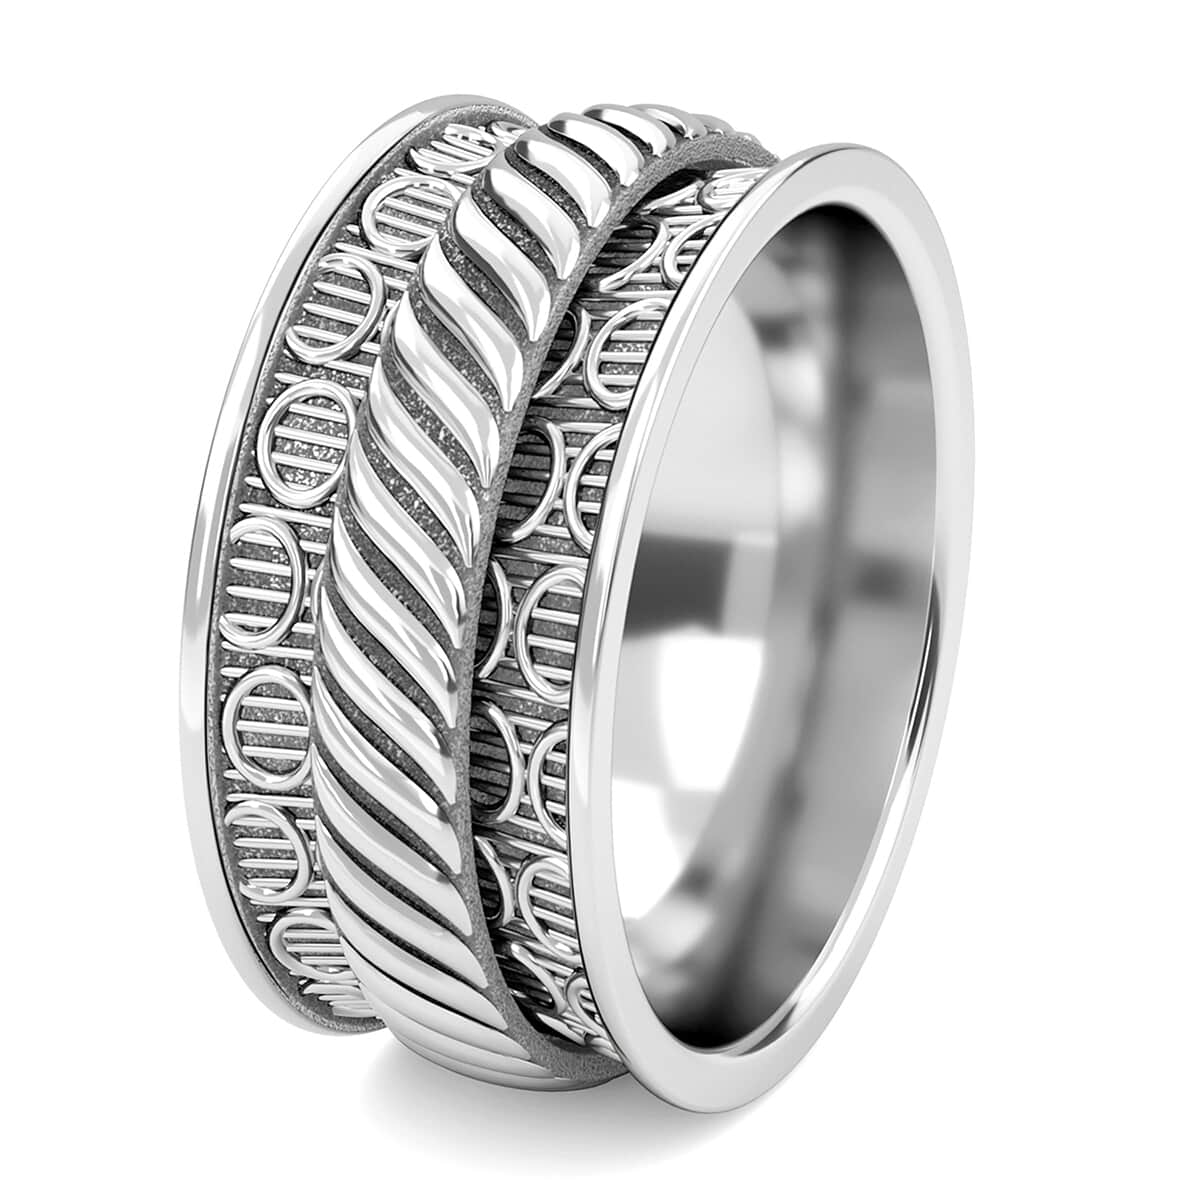 Sterling Silver Spinner Ring, Anxiety Ring for Women, Fidget Rings for Anxiety for Women, Stress Relieving Anxiety Ring (Size 8.0) (4.75 g) image number 5